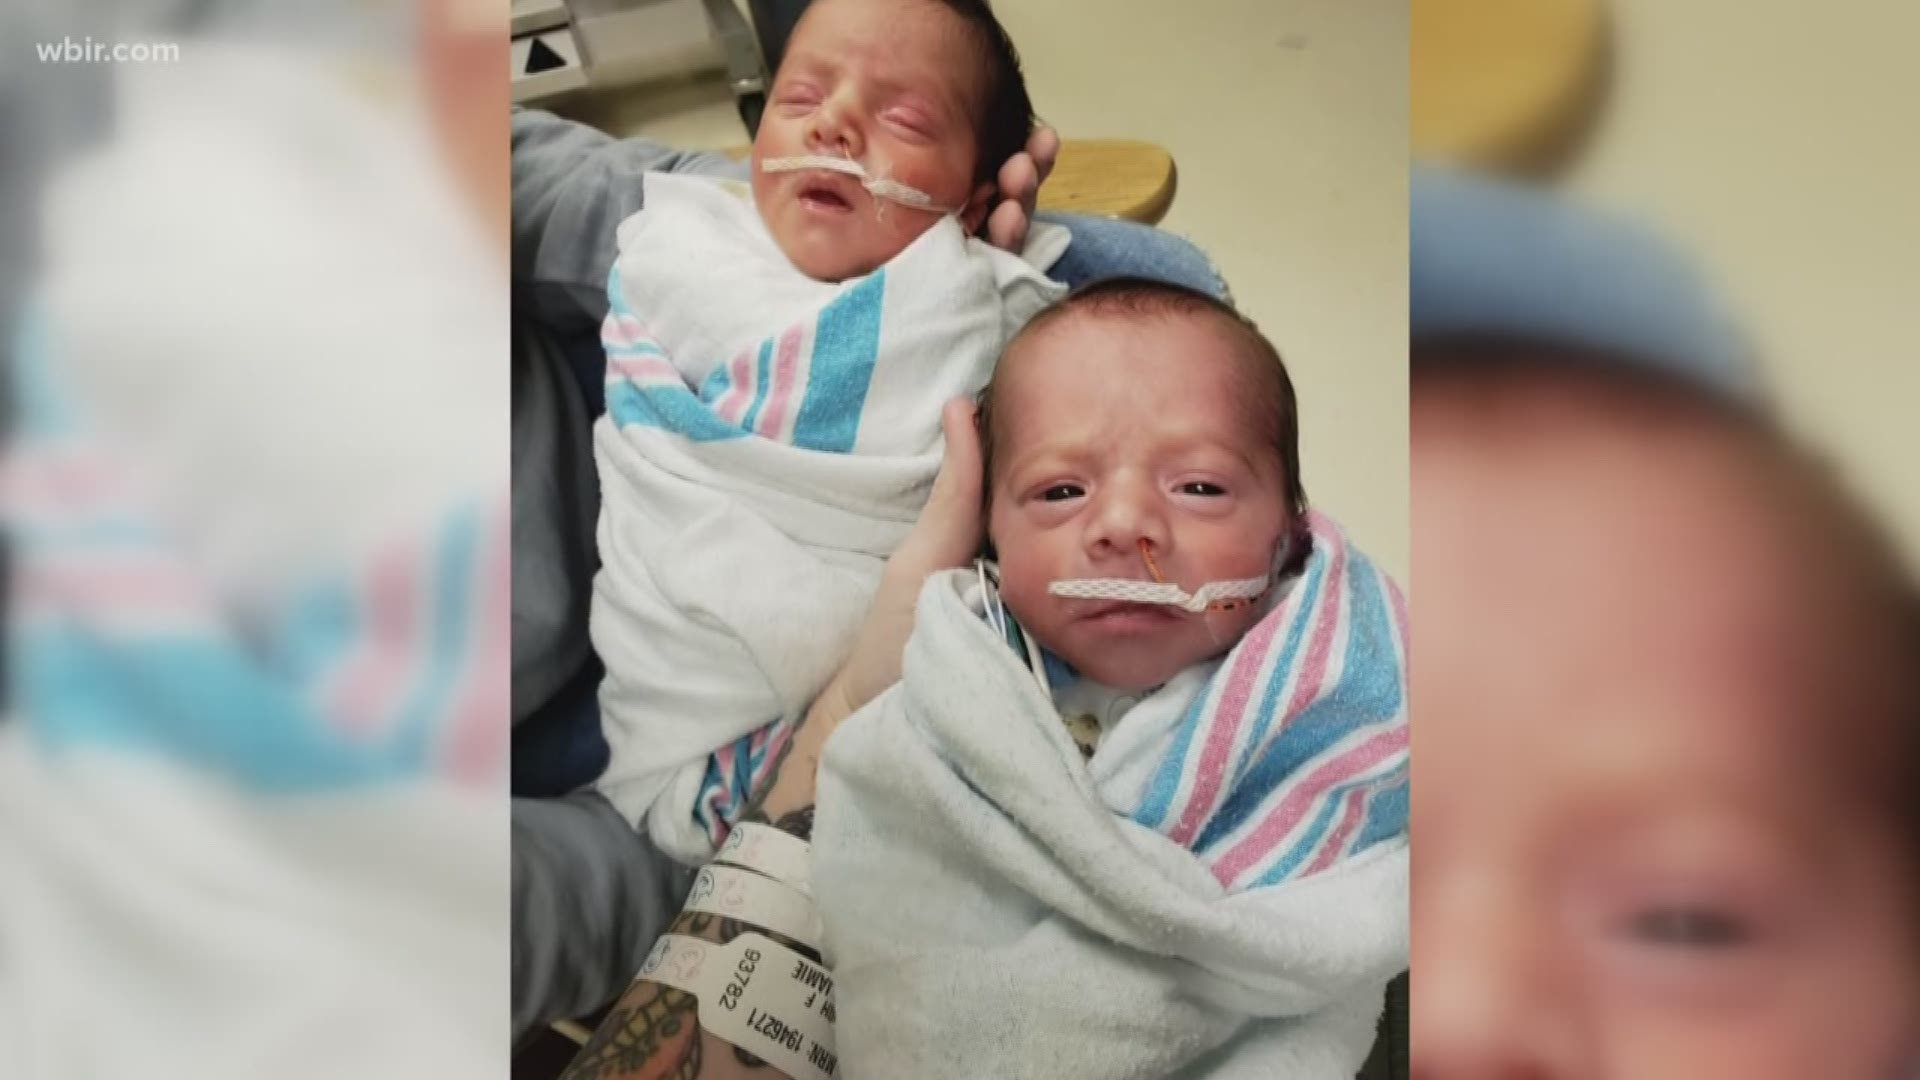 An East Tennessee mom of quadruplets -- born less than two weeks ago - shares her story of love and loss.